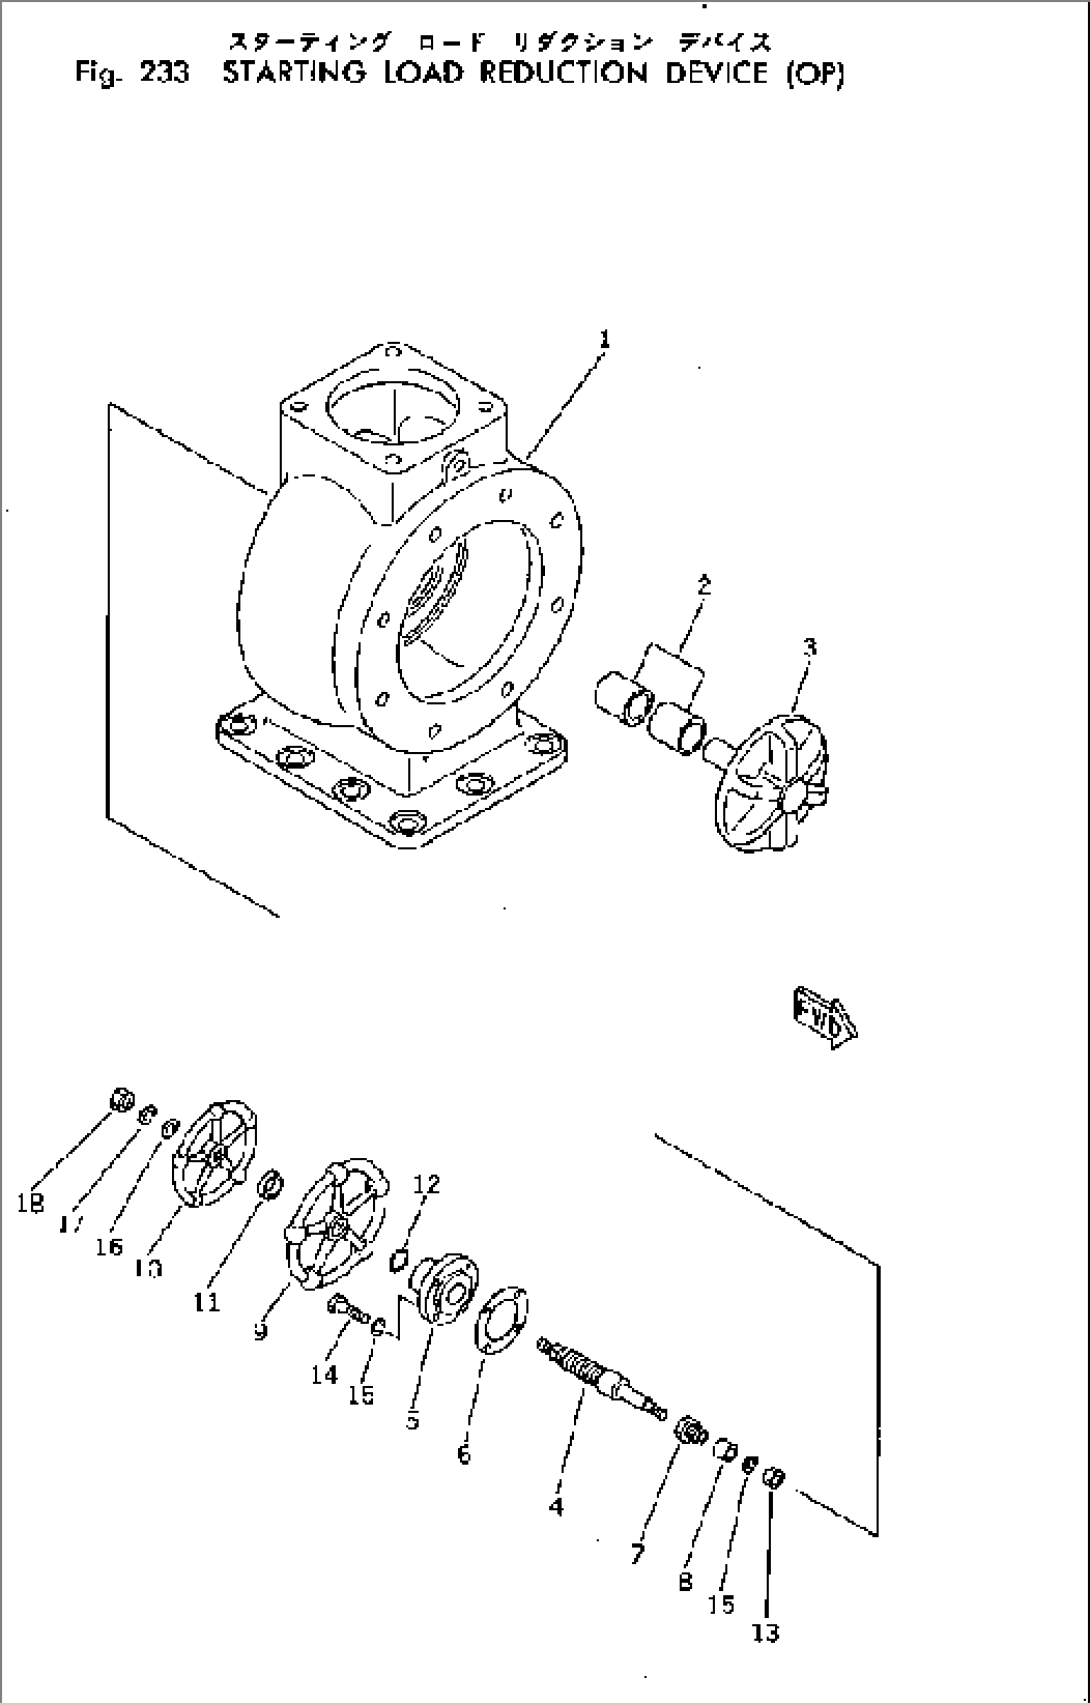 STARTING LOAD REDUCTION DEVICE